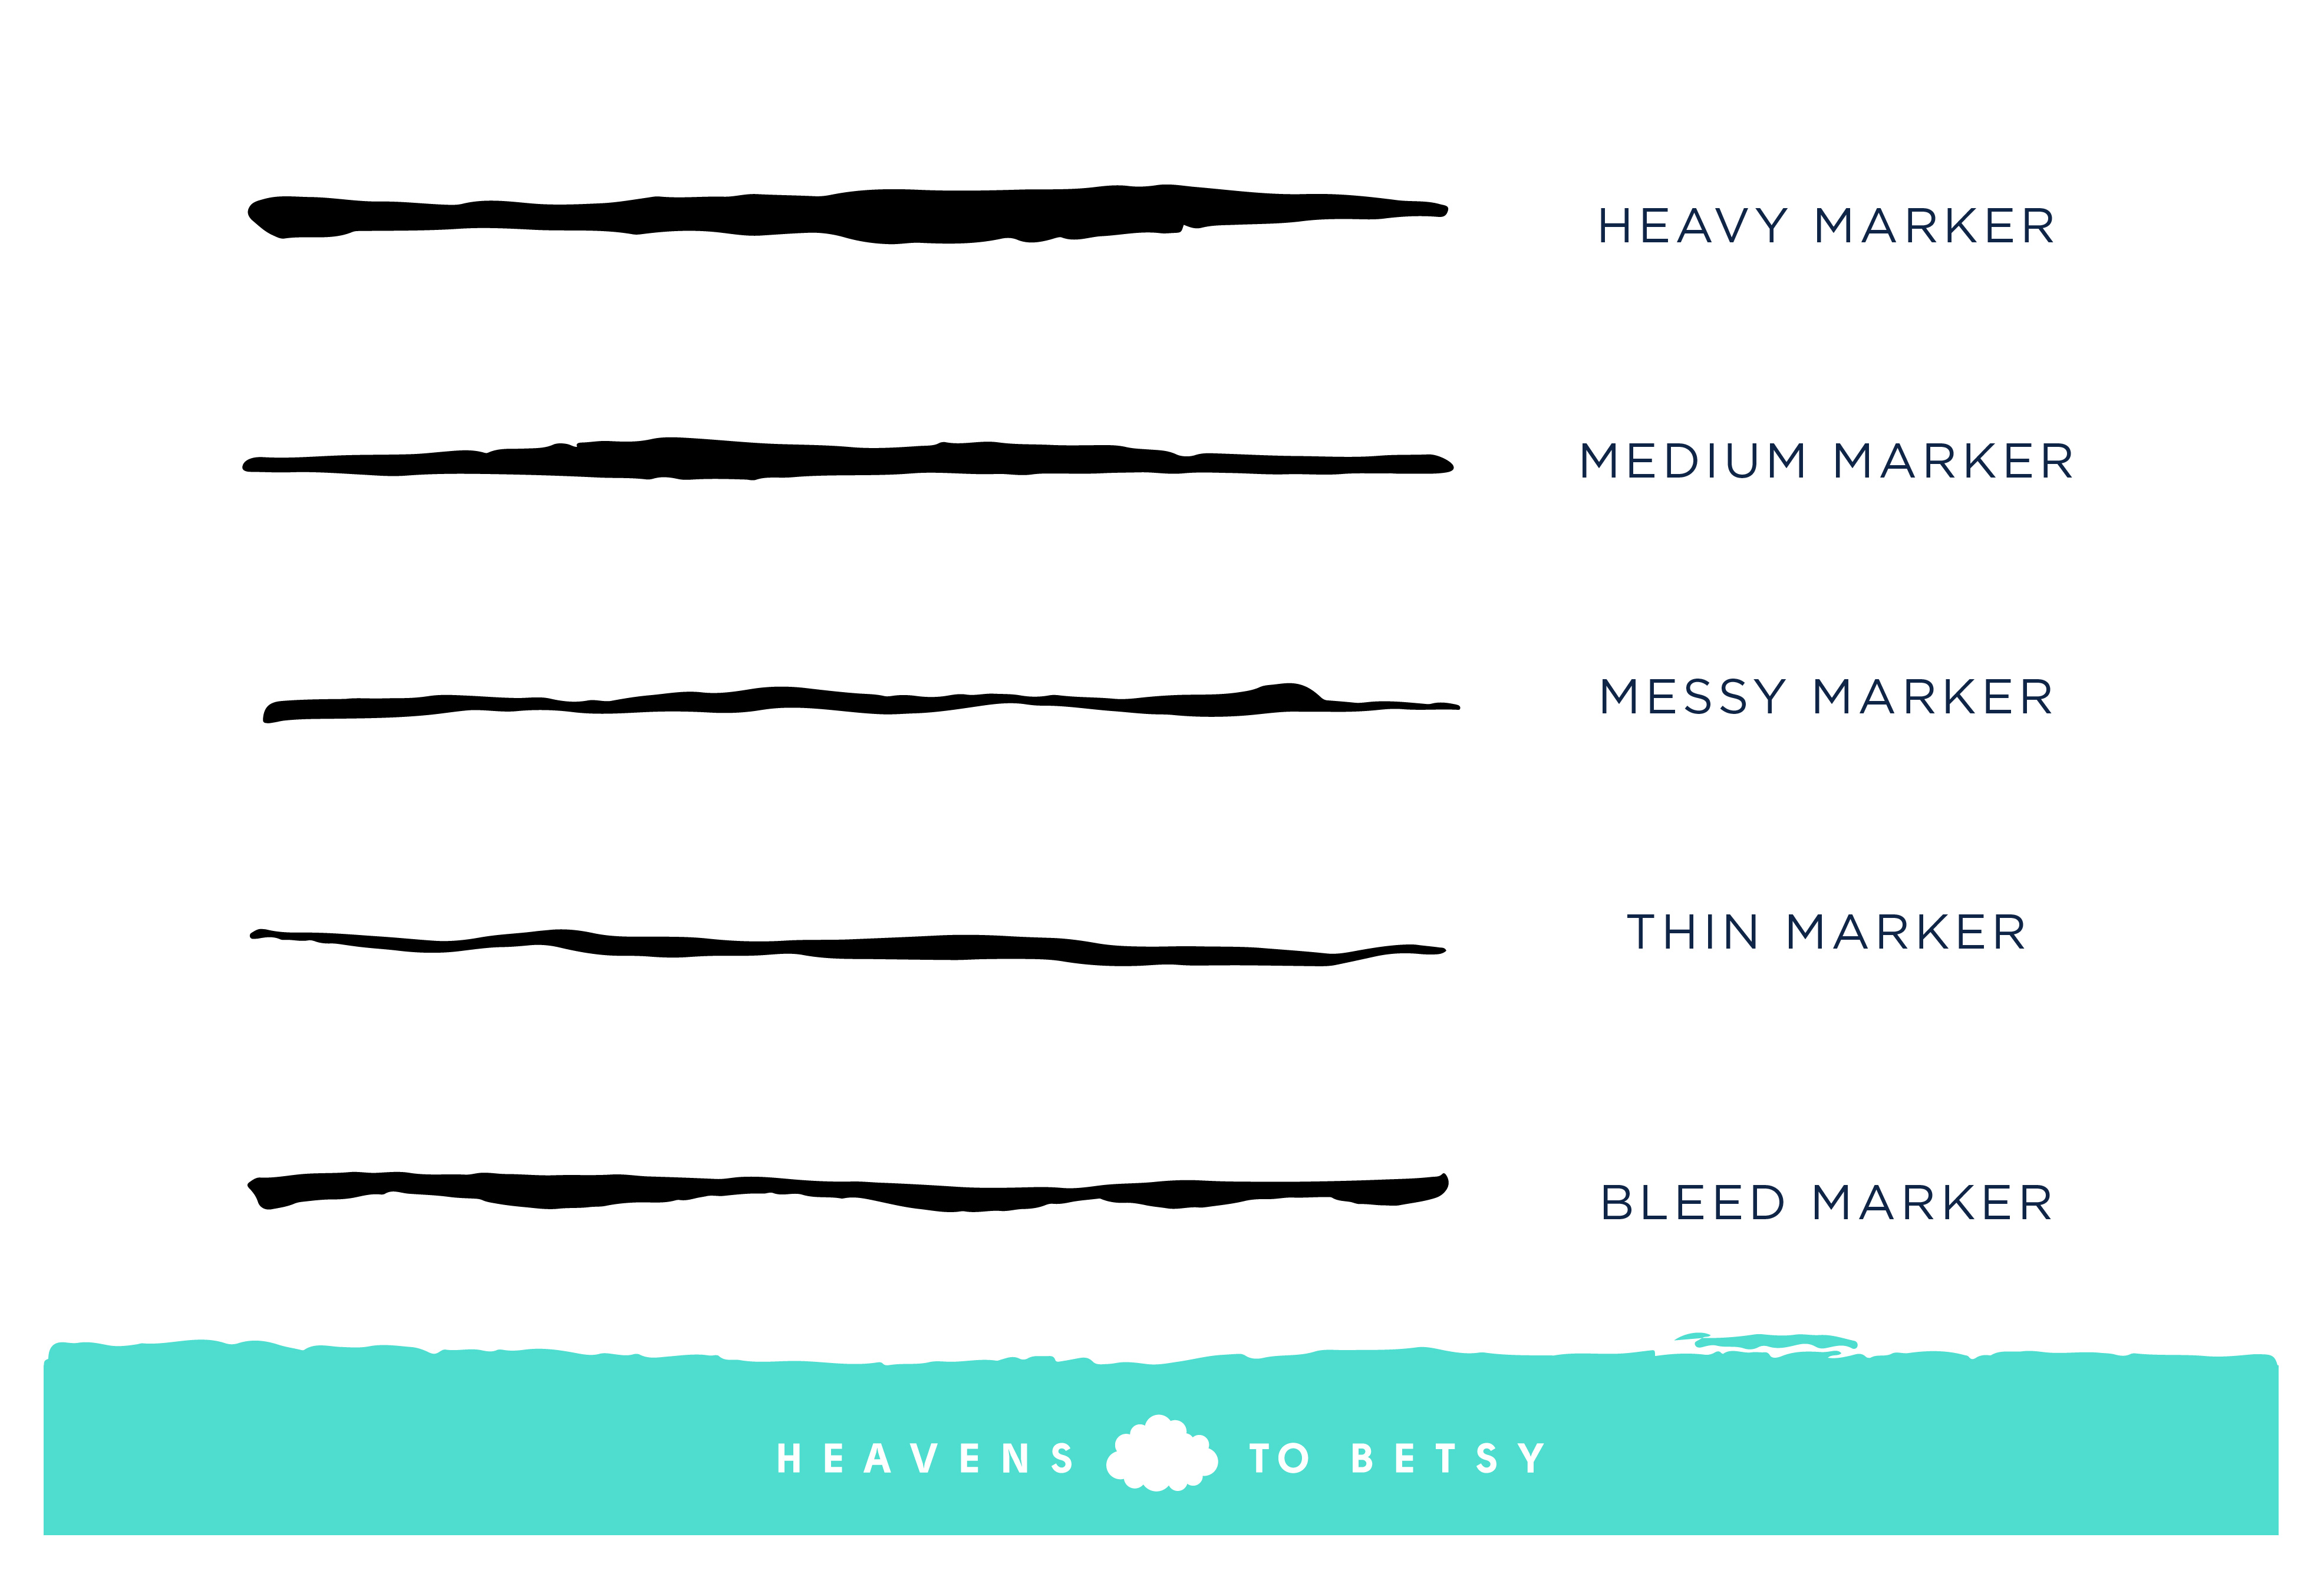 Ink & Marker, hand crafted texture vector brushes for Adobe Illustrator